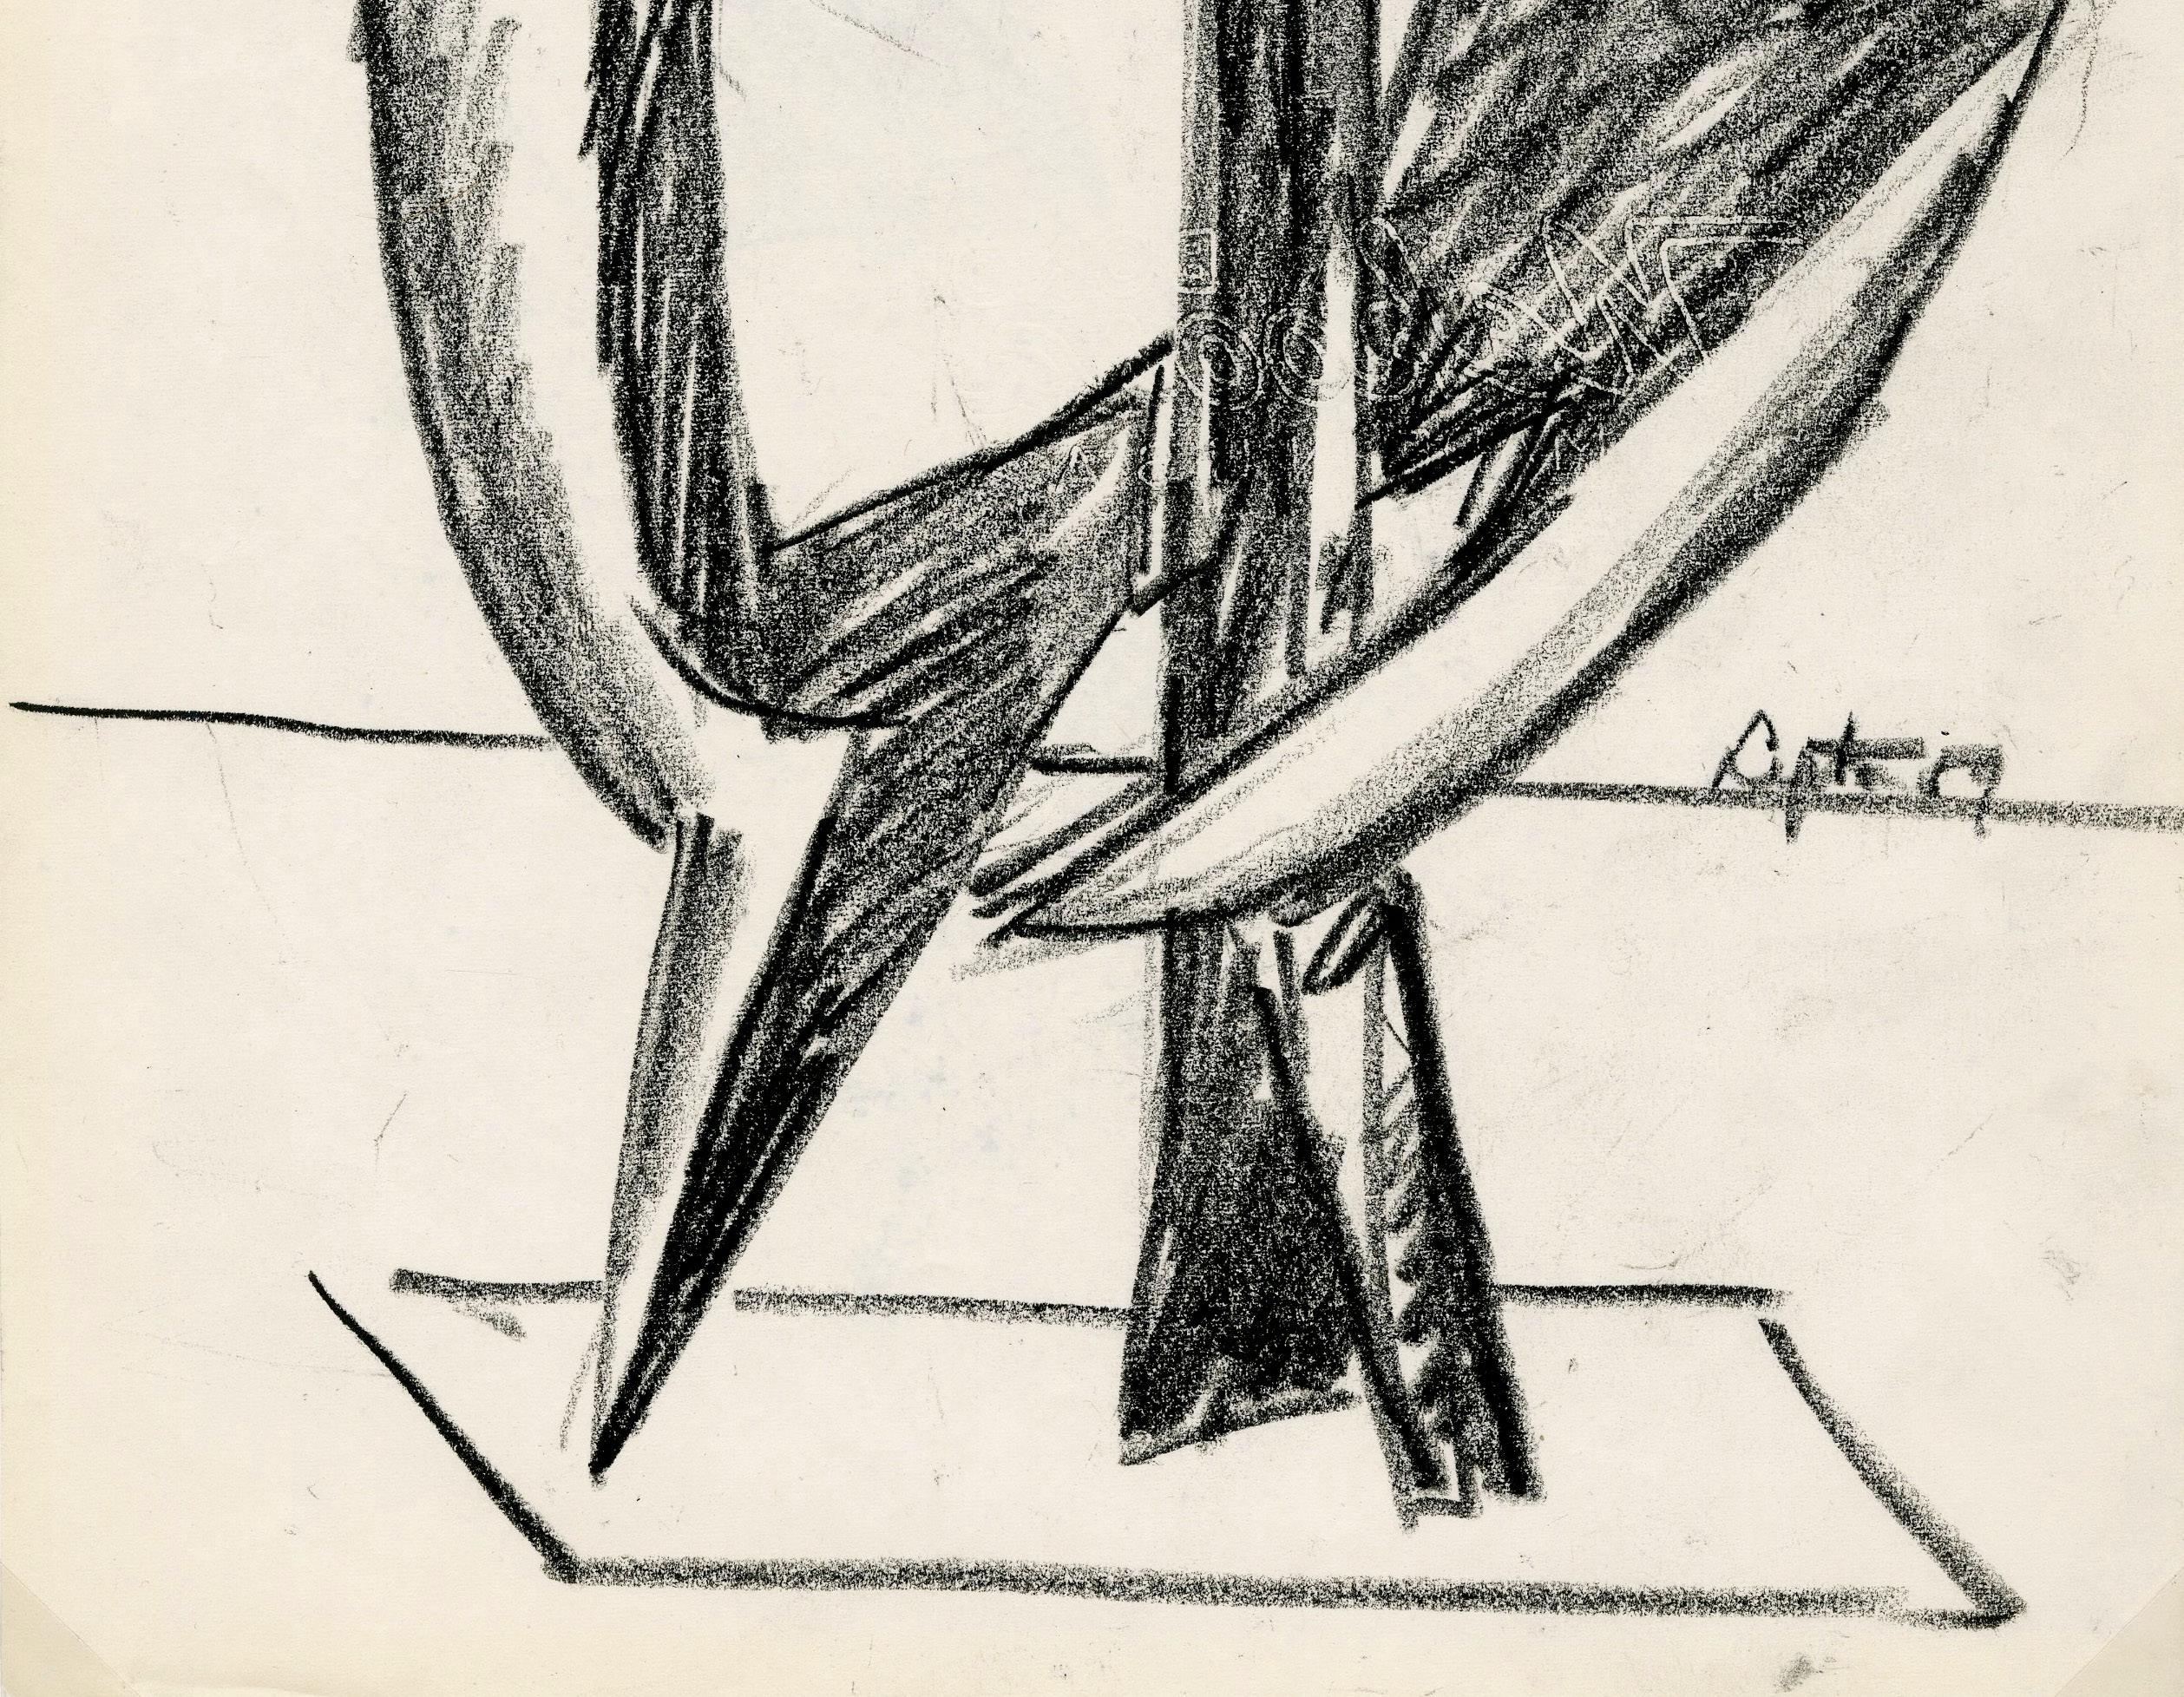 Preliminary drawing for a sculpture
Black crayon on paper, 1959
Signed and dated middle right (see photo)
A rare 1950's AbEx drawing.
Provenance:
Estate of the artist
Michael and Alan Lipton (sons)
Wilkes University, Wilkes Barre, PA
De-accessed